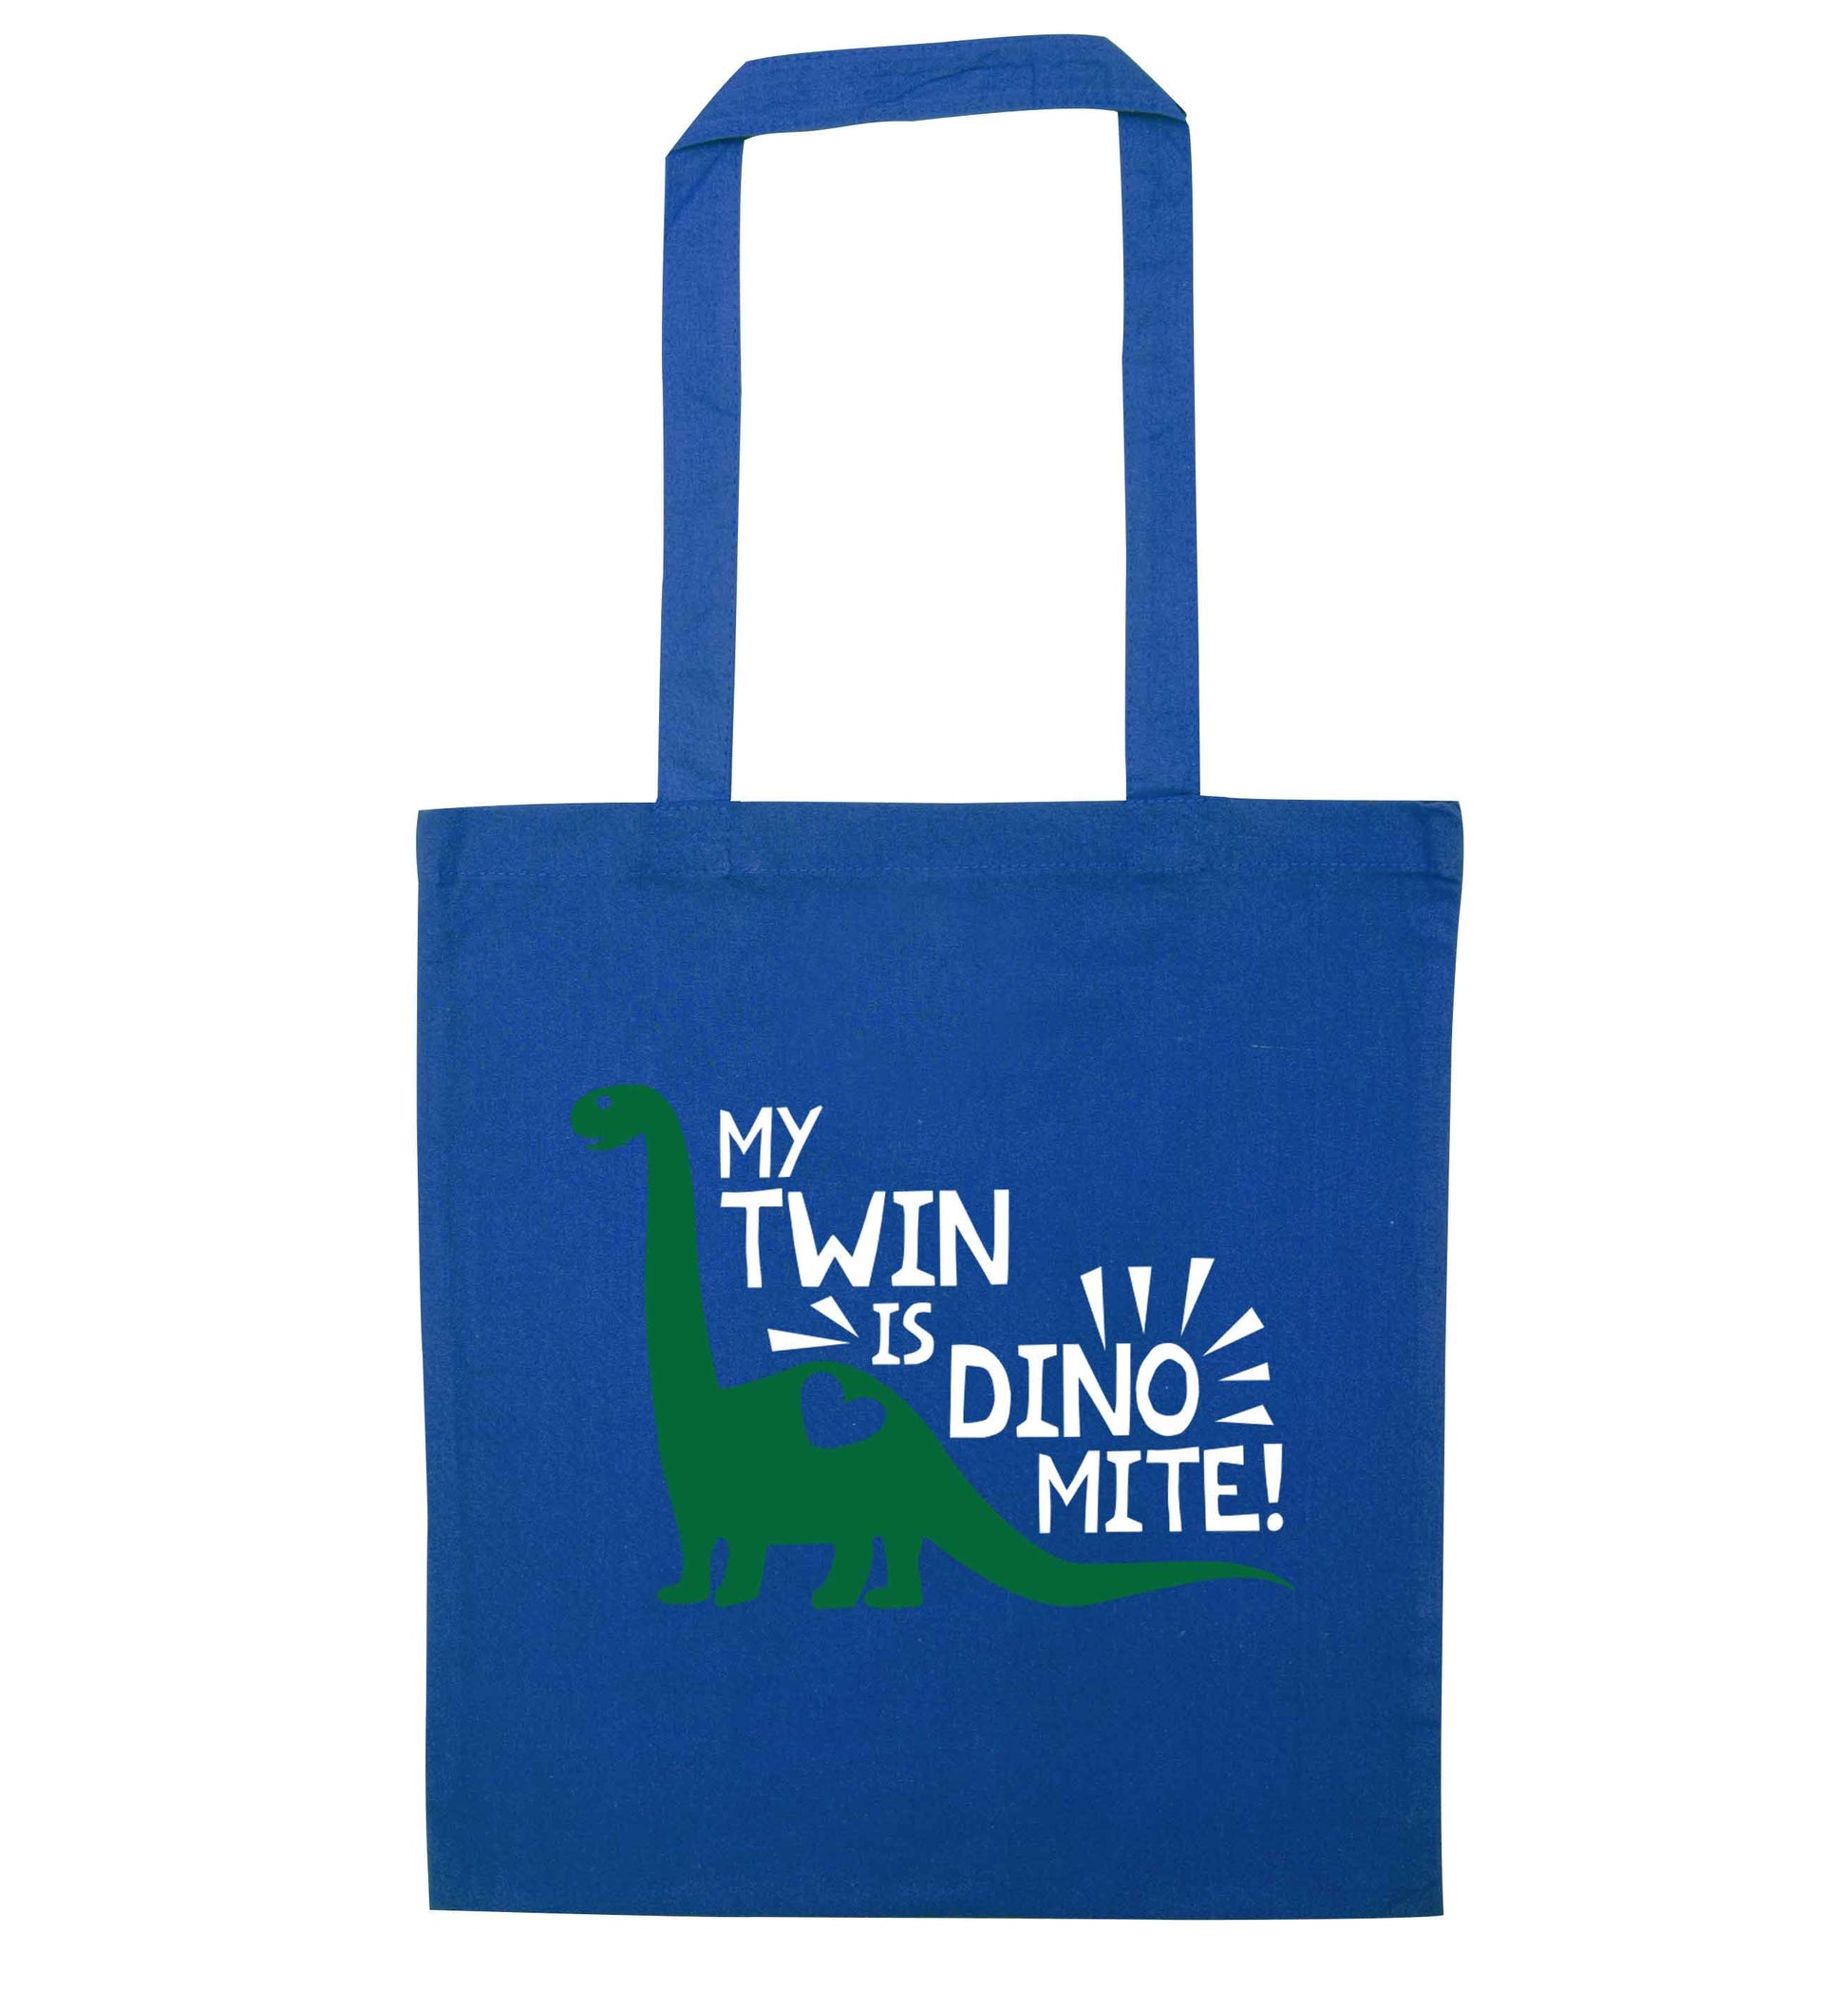 My twin is dinomite! blue tote bag